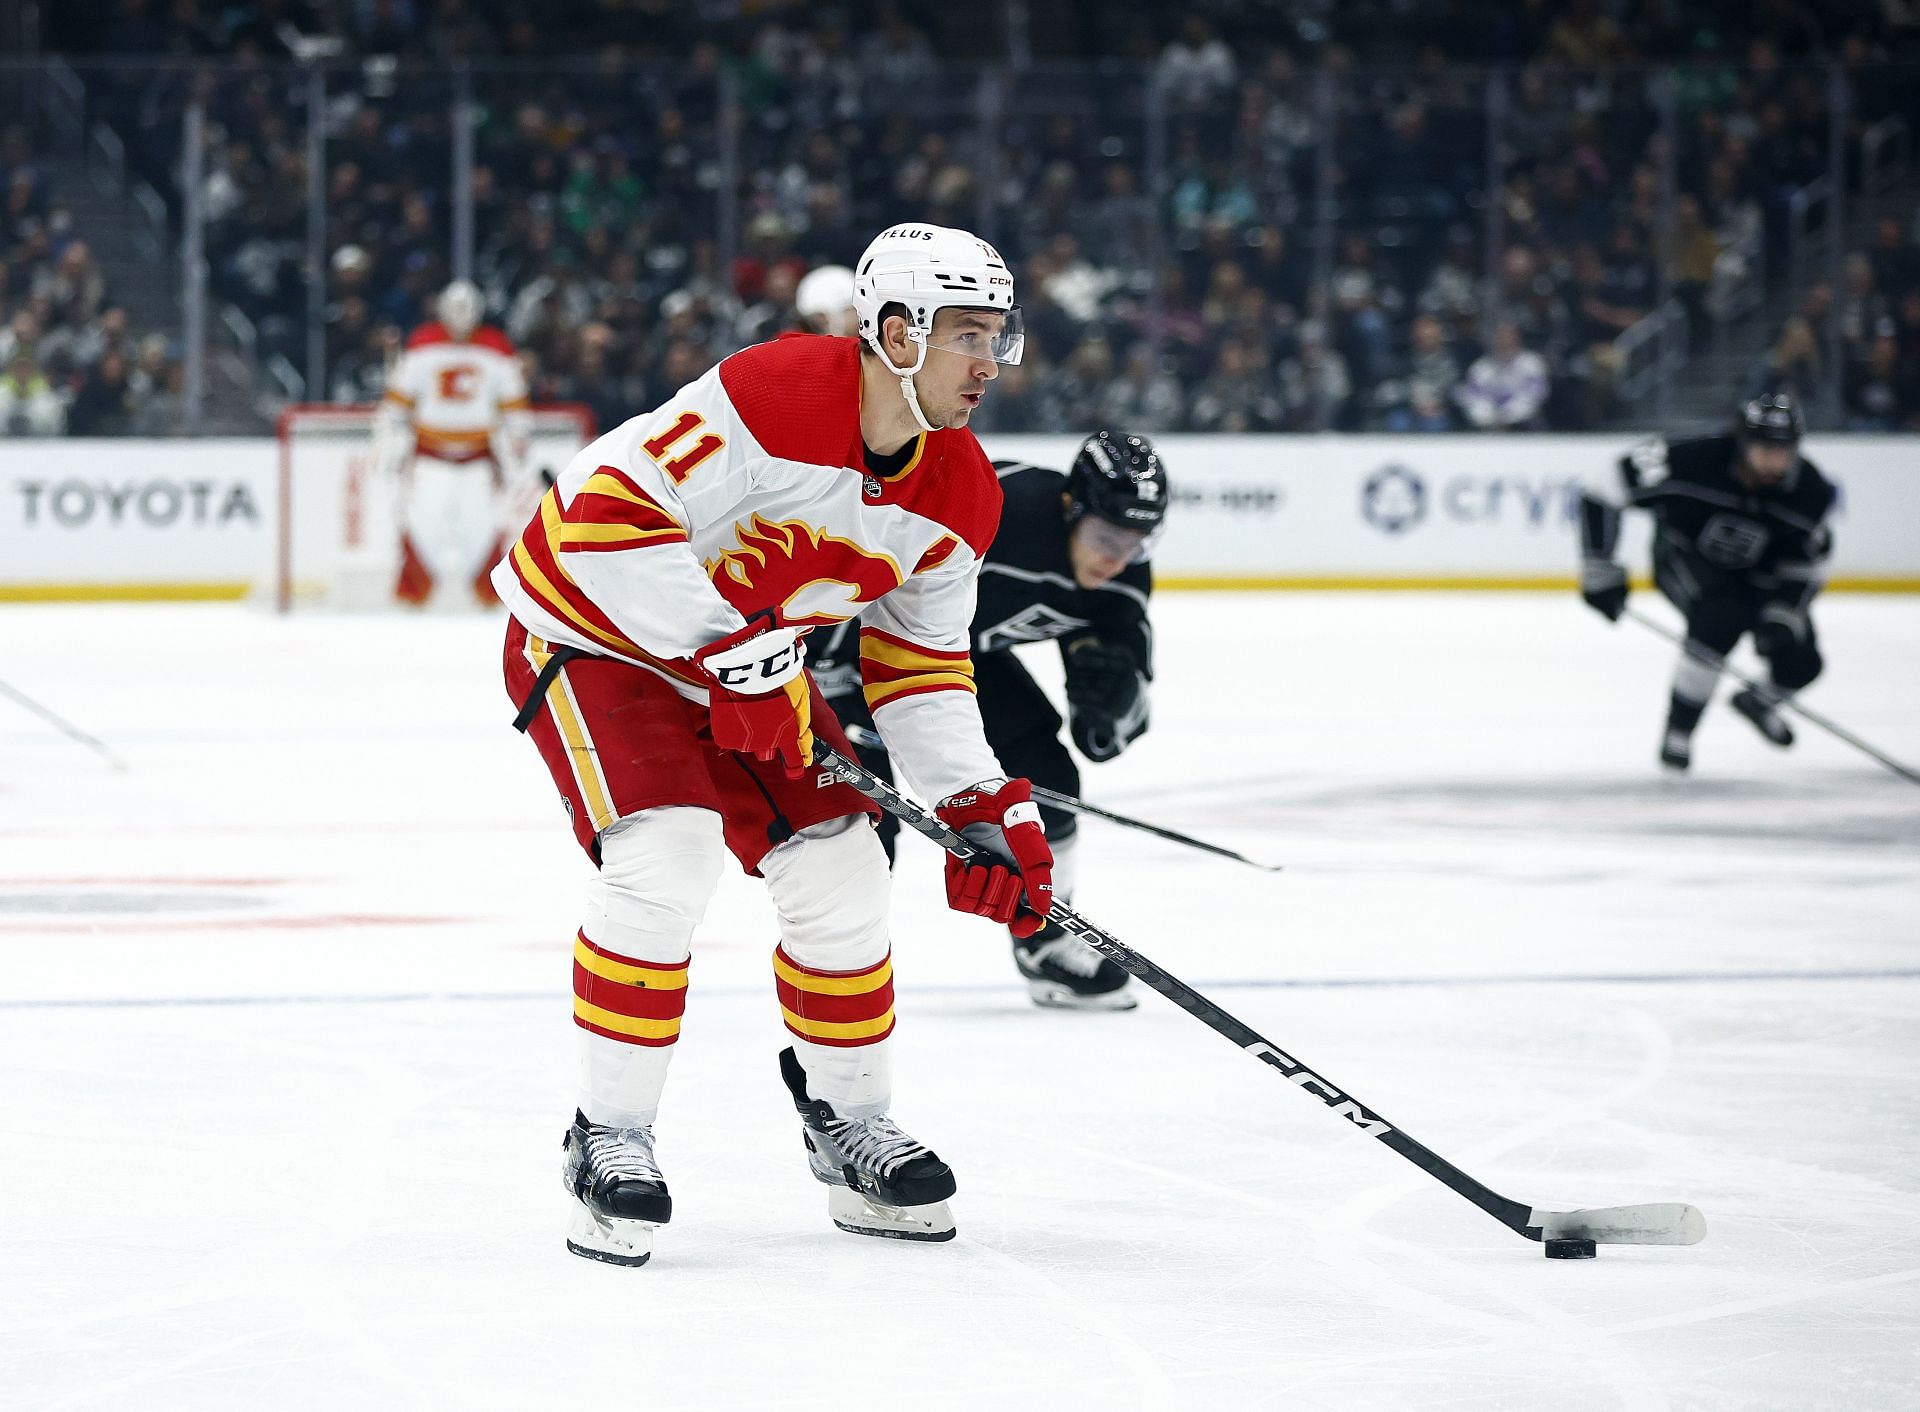 Flames sign Mikael Backlund to 2-year extension, name him captain